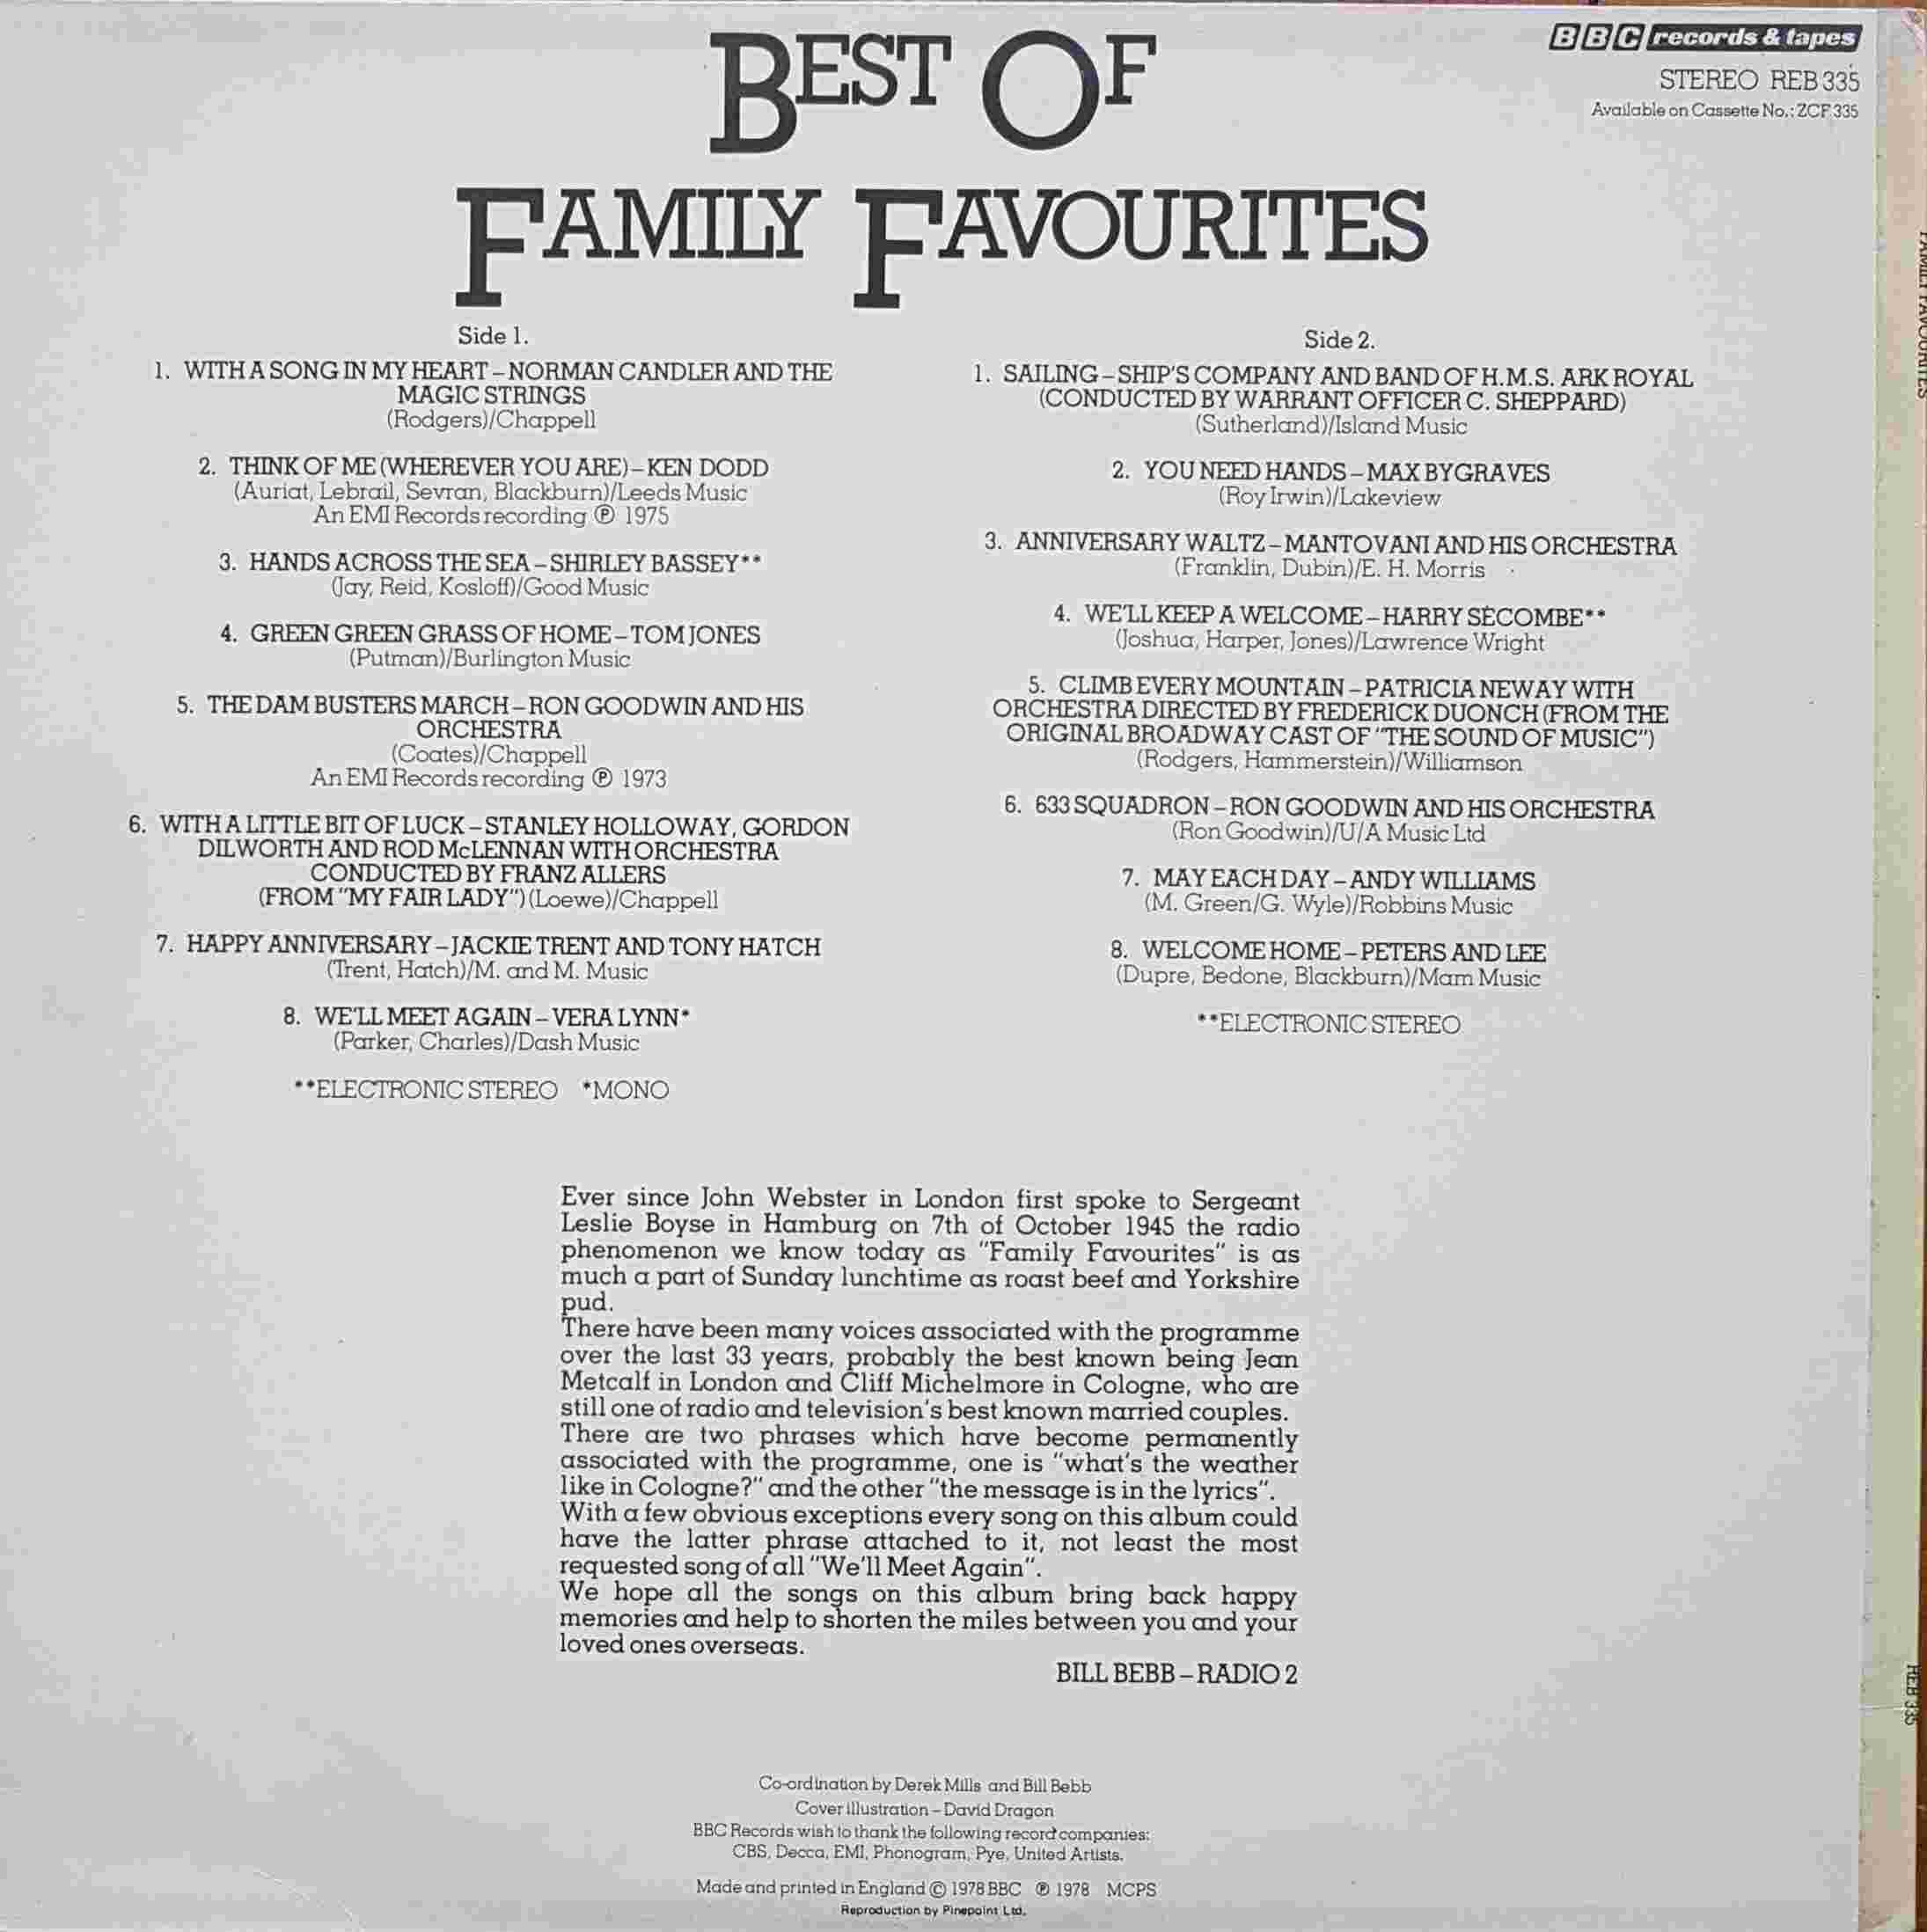 Picture of REB 335 The best of family favourites by artist Various from the BBC records and Tapes library